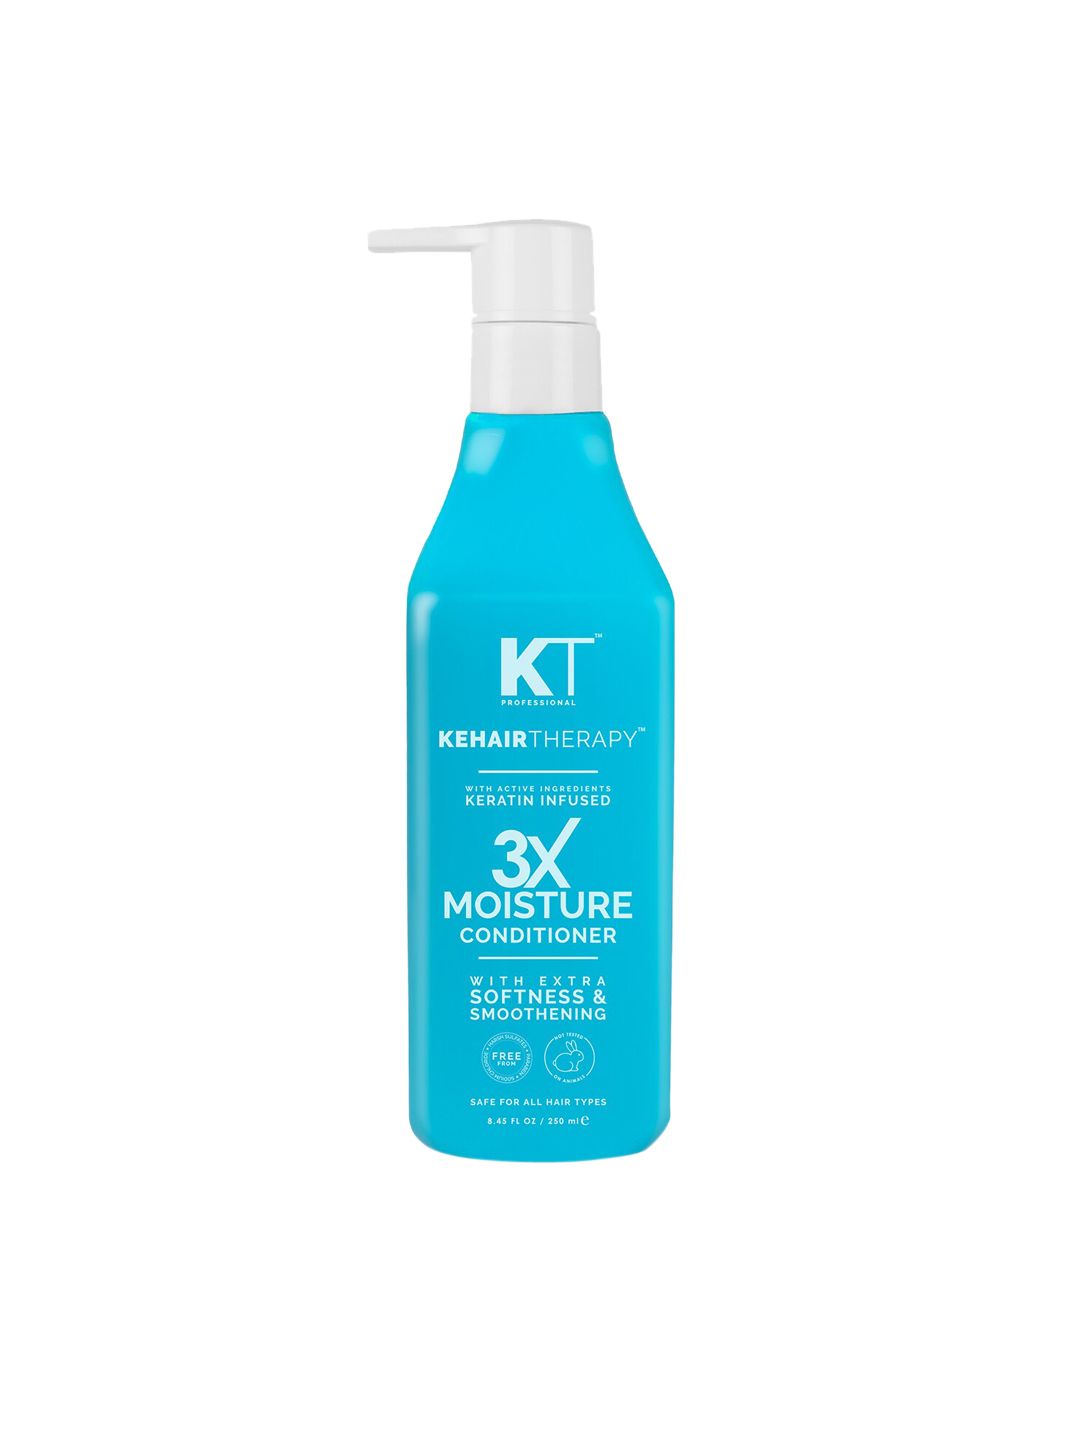 KEHAIRTHERAPY KT Professional Sulfate-free 3X Moisture Conditioner Price in India